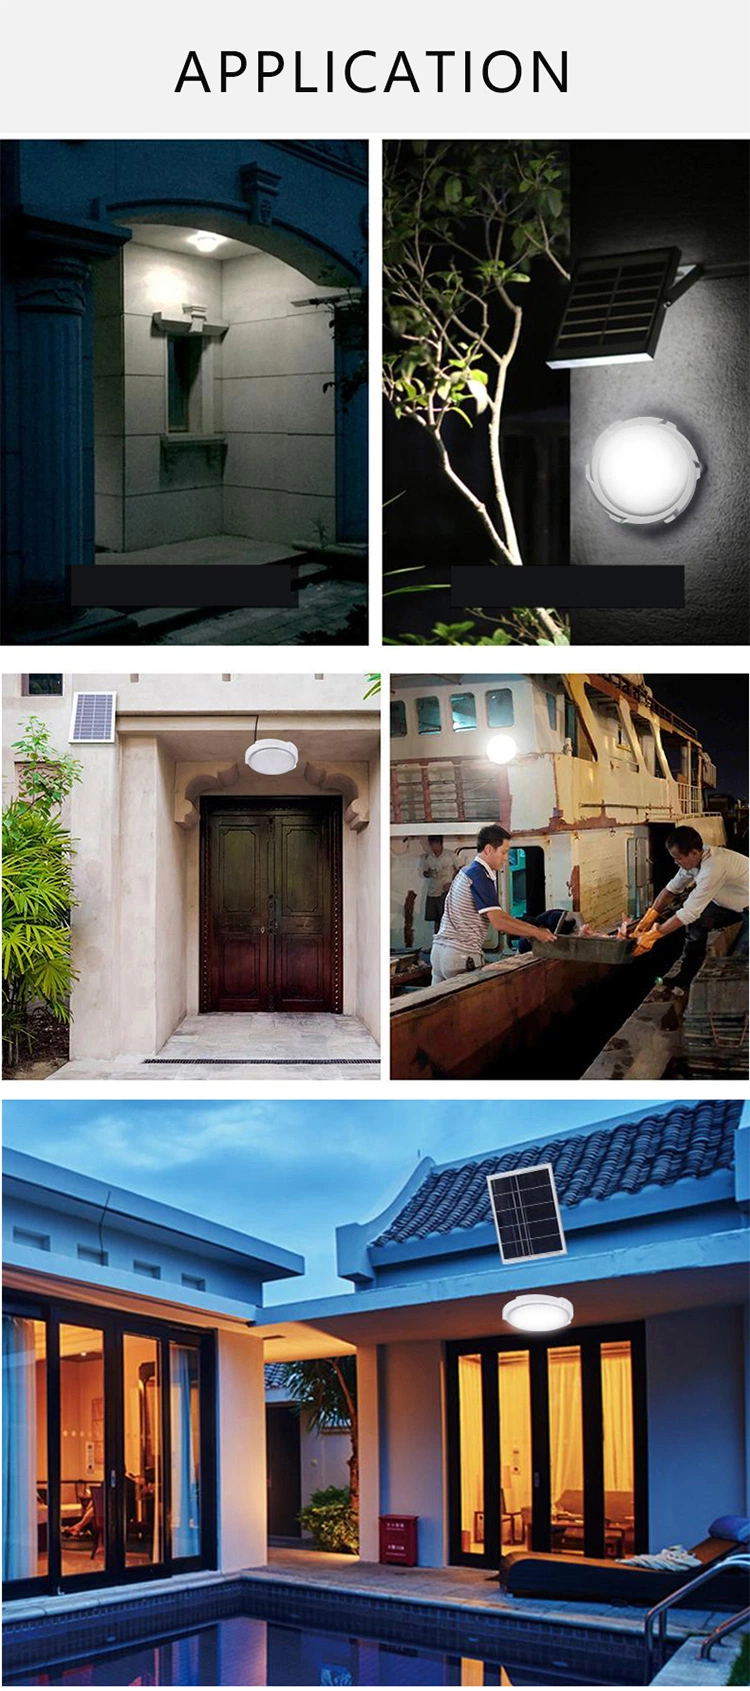 100W 200W 300W 400W LED Spotlight Wall Lamp Solar System Indoor Ceiling LED Light for Home Garden Outdoor